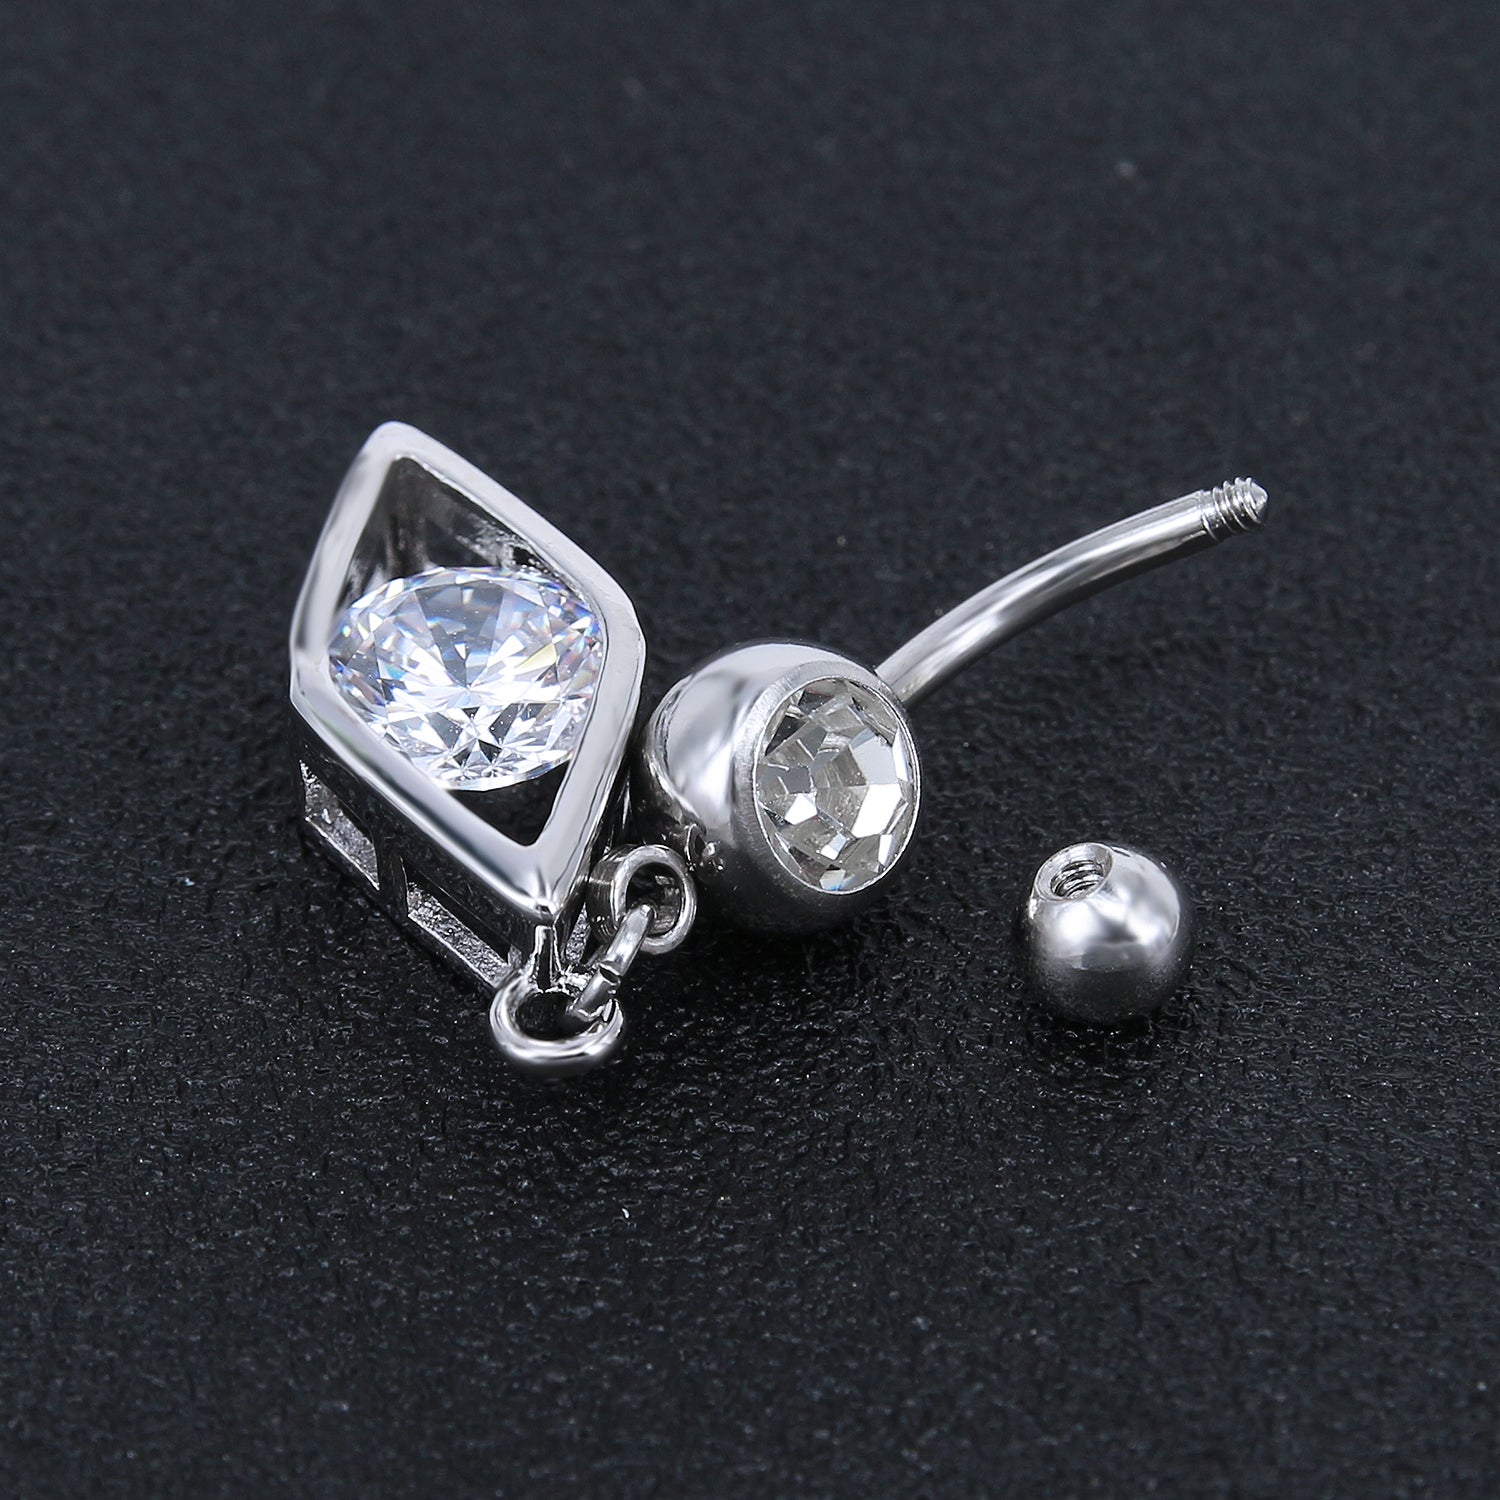 14g-Prismatic-Stainless-Steel-Belly-Button-Rings-White-Zircon-Dangle-Navel-Ring-Piercing-Jewelry